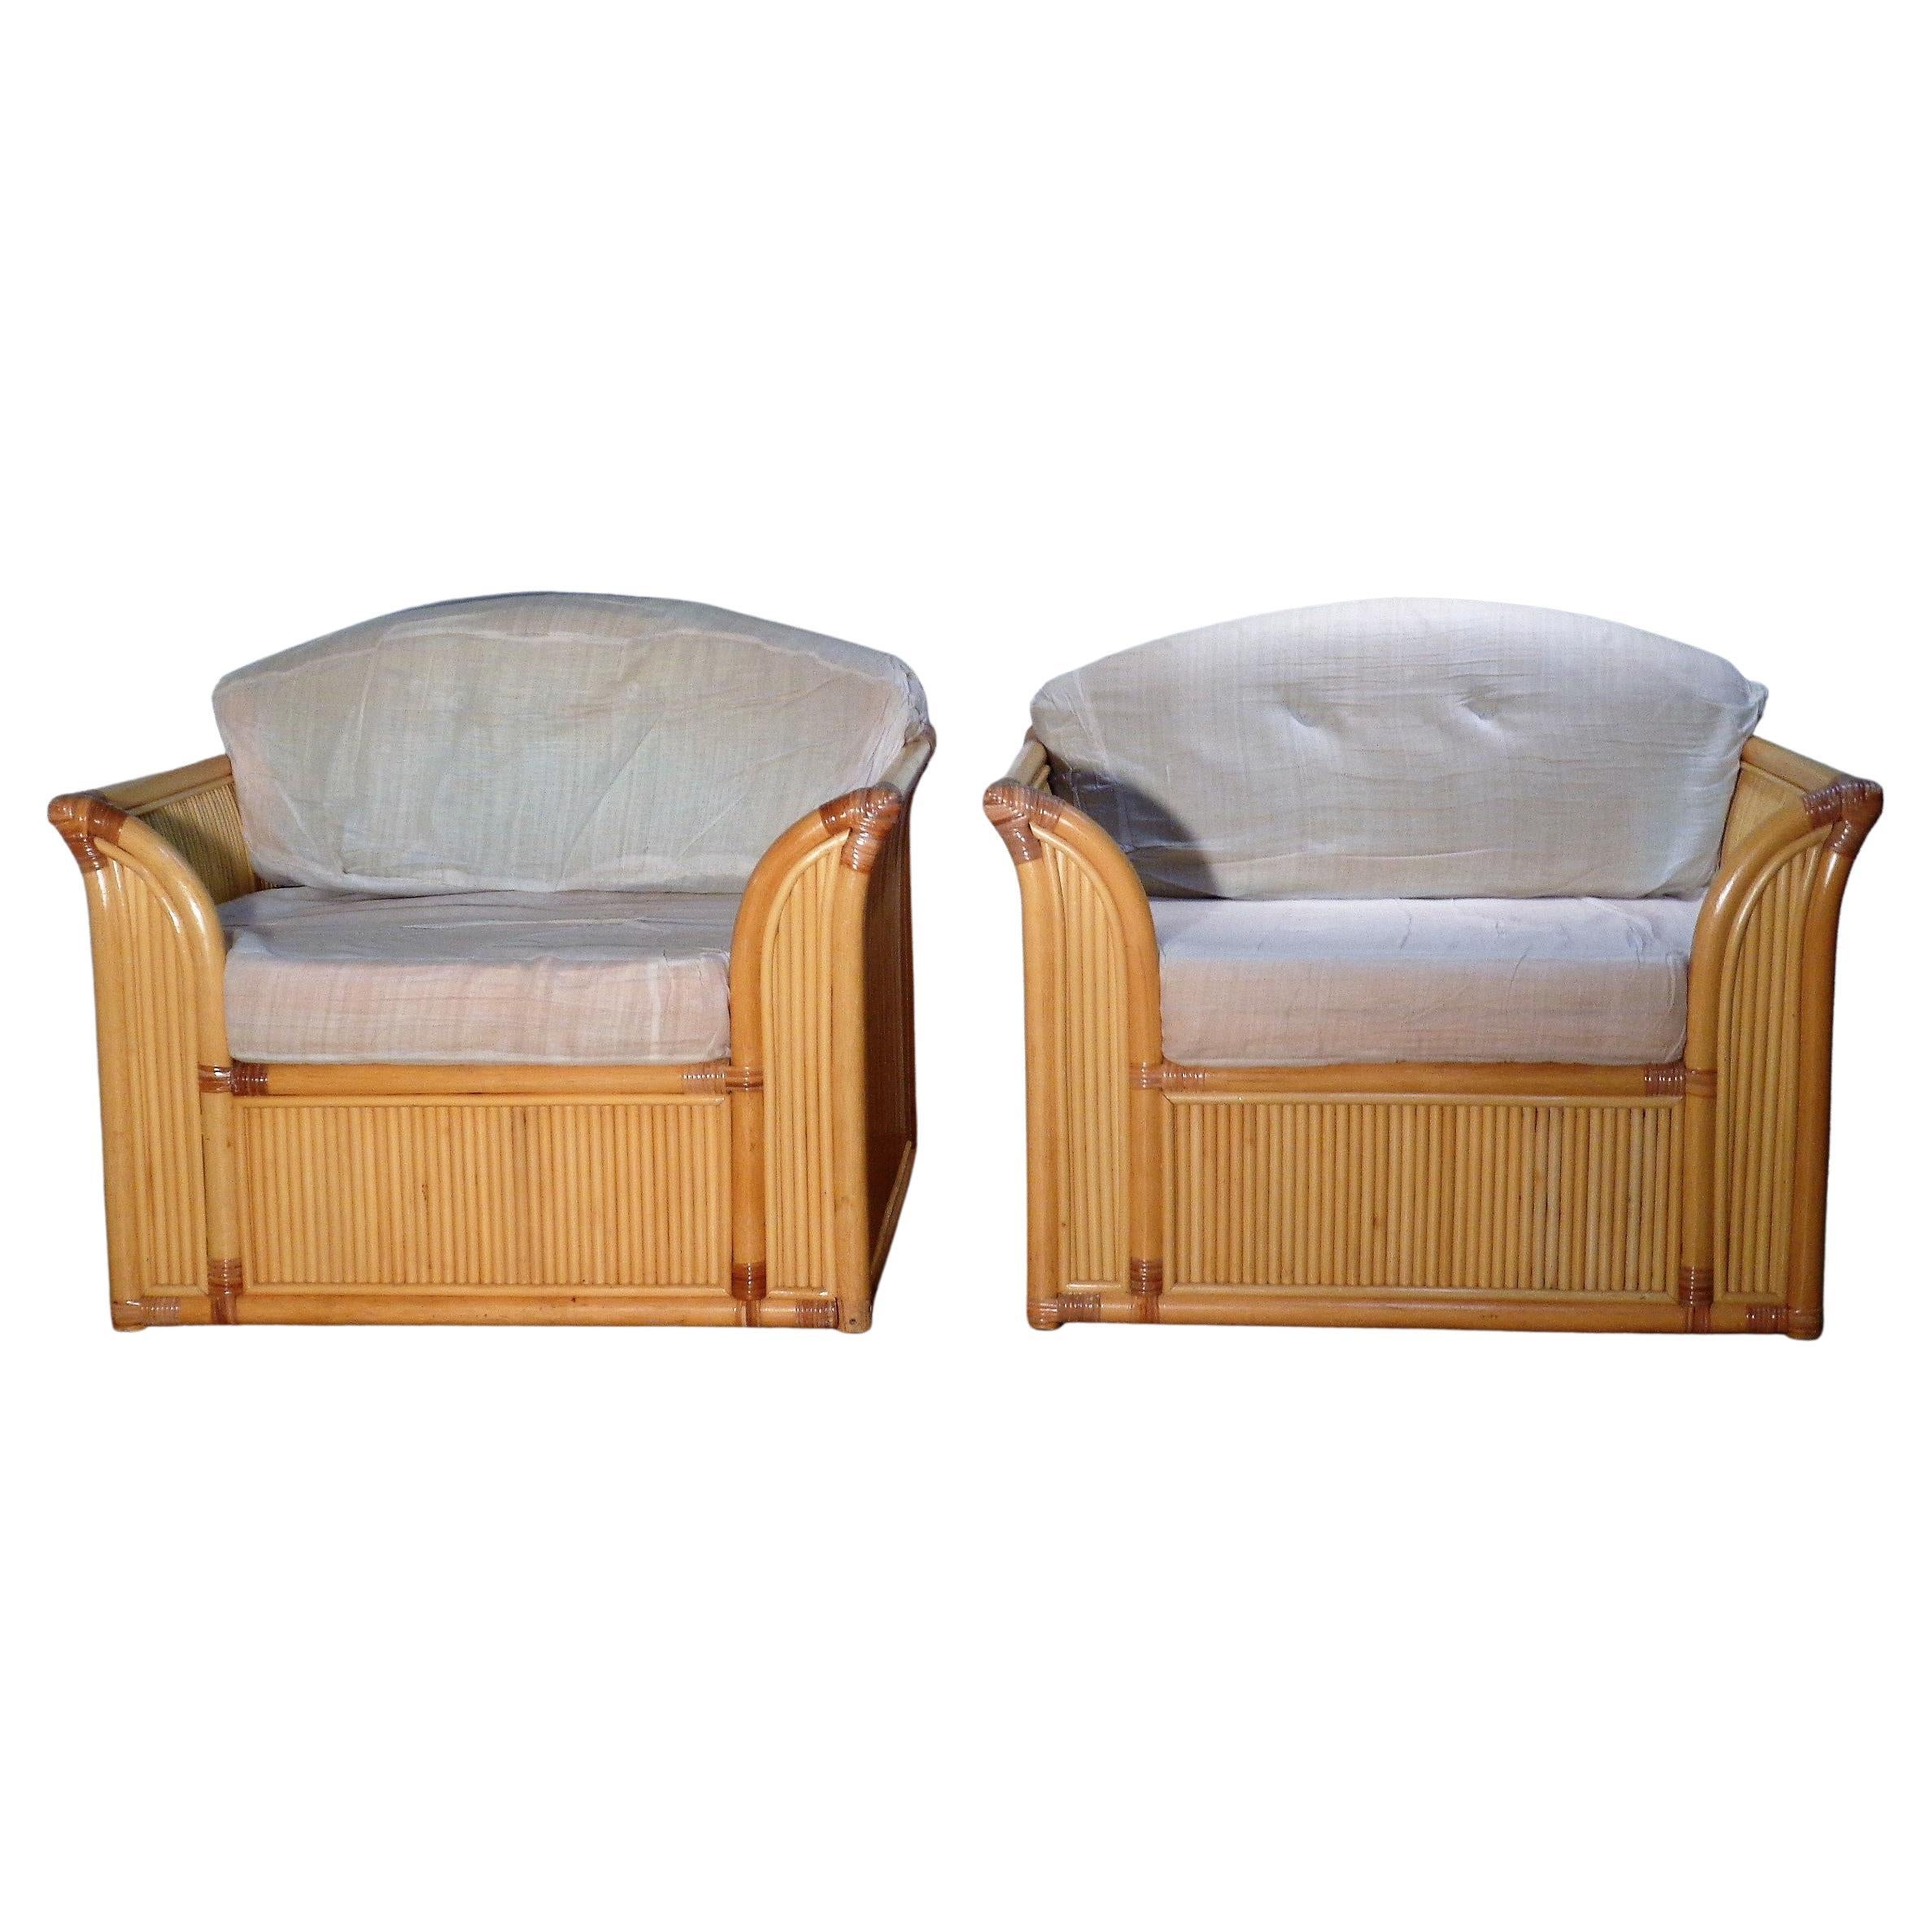  Pair Large Rattan Lounge Chairs, 1970-1980 For Sale 2